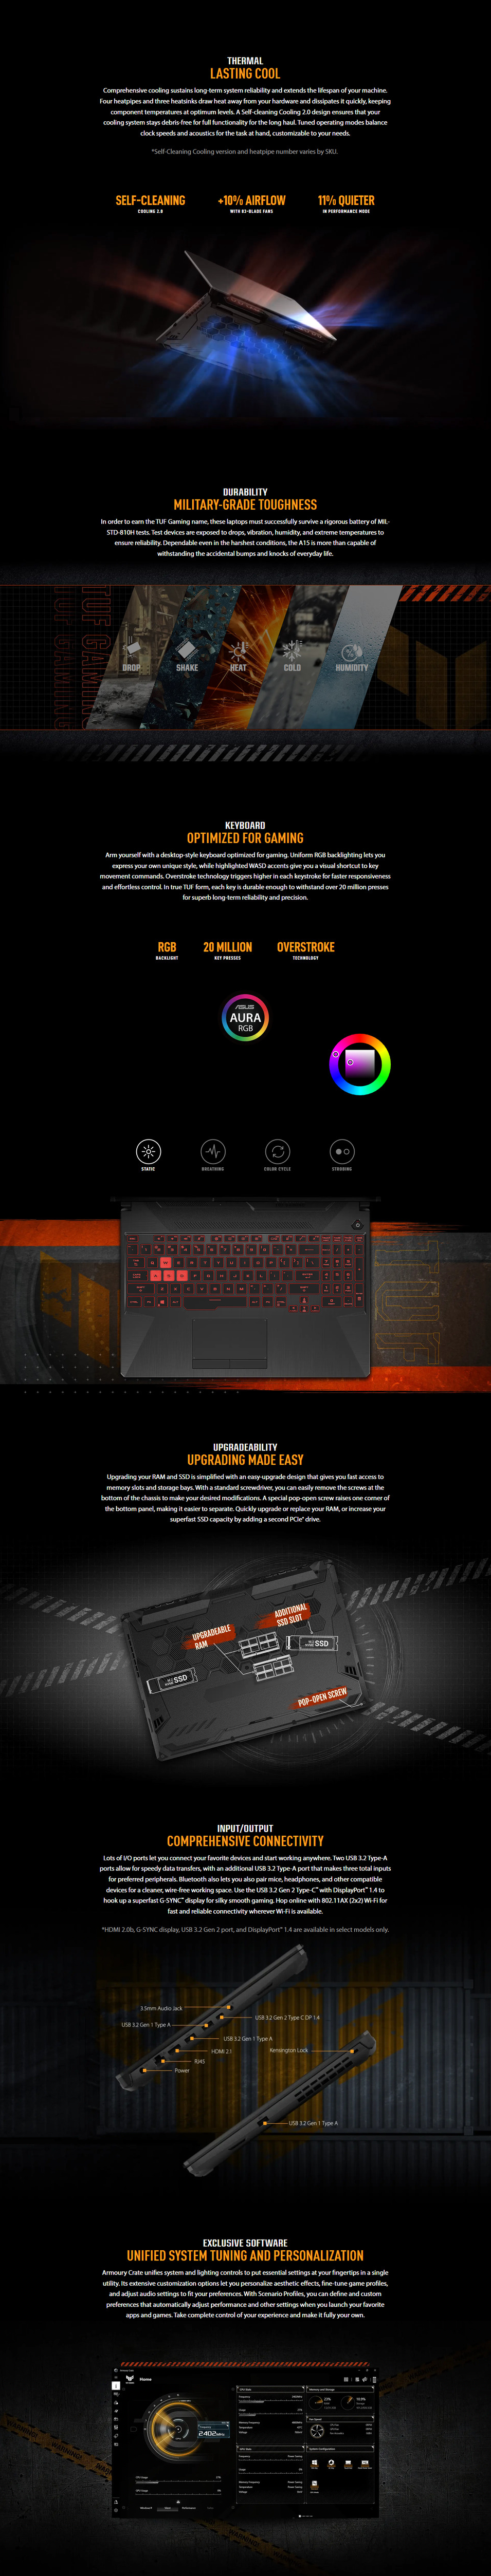 A large marketing image providing additional information about the product ASUS TUF Gaming A15 (FA506) - 15.6" Ryzen 5, RTX 3050, 16GB/512GB - Win 11  Notebook - Additional alt info not provided